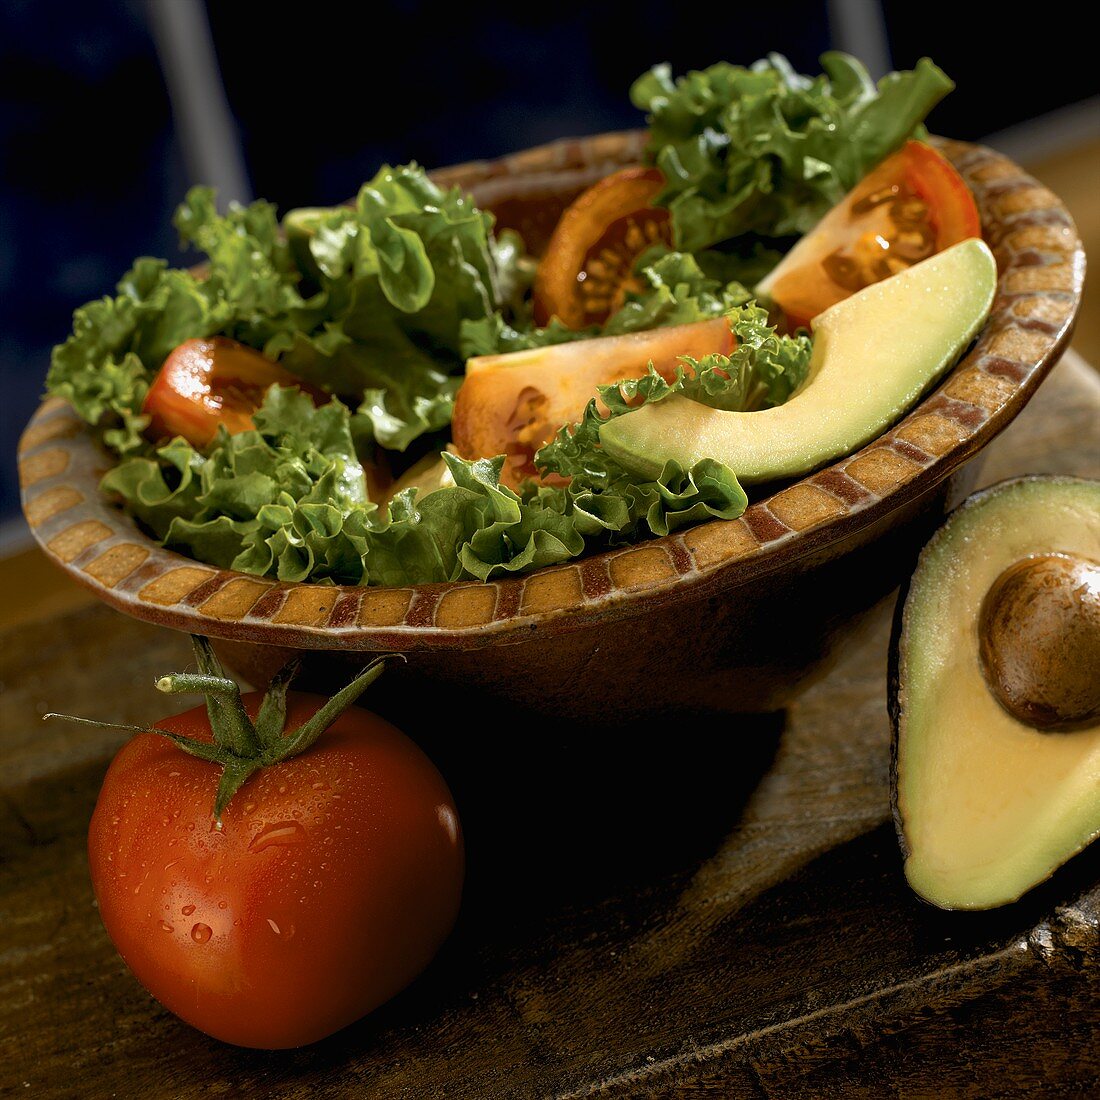 Salad with Tomato and Avocado in a Bowl, Tomato and Half an Avocado